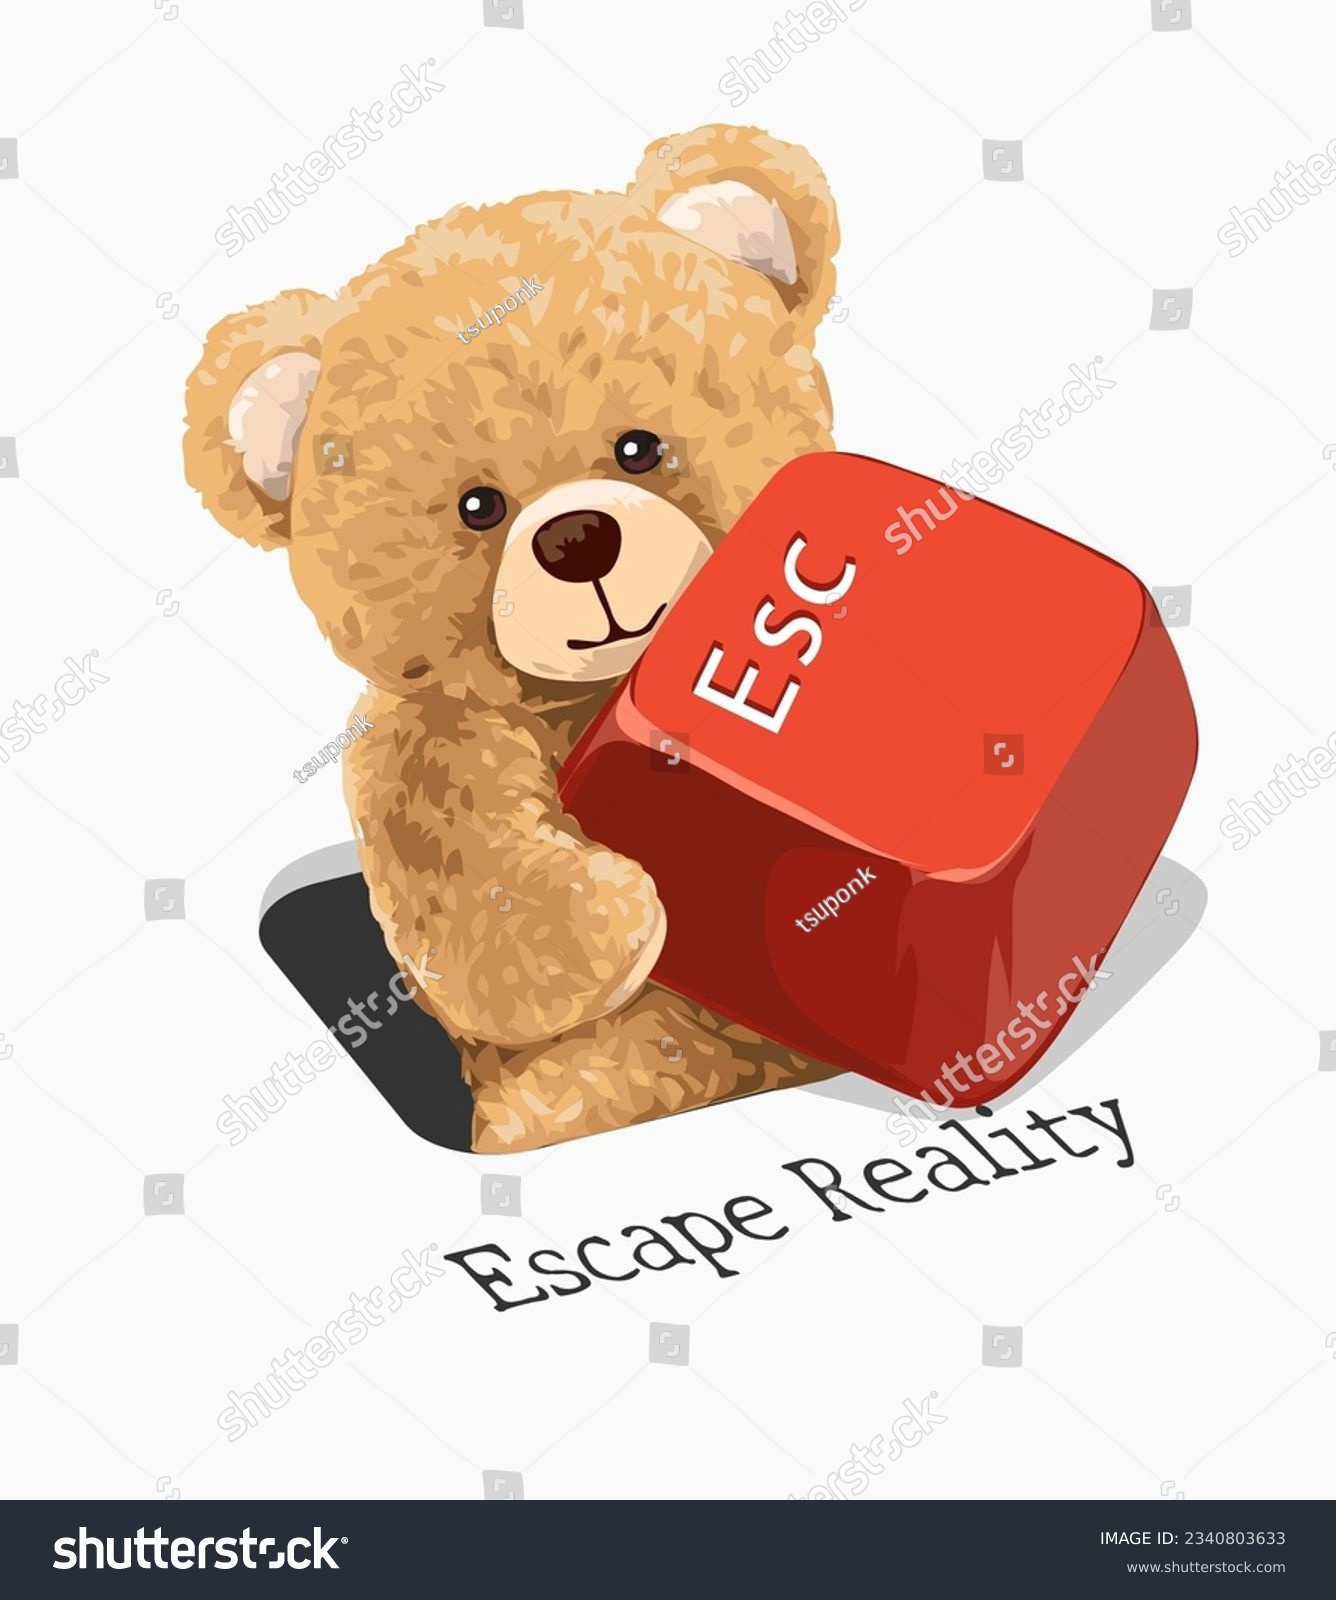 escape reality slogan with bear doll holding keyboard keycap vector illustration #2340803633